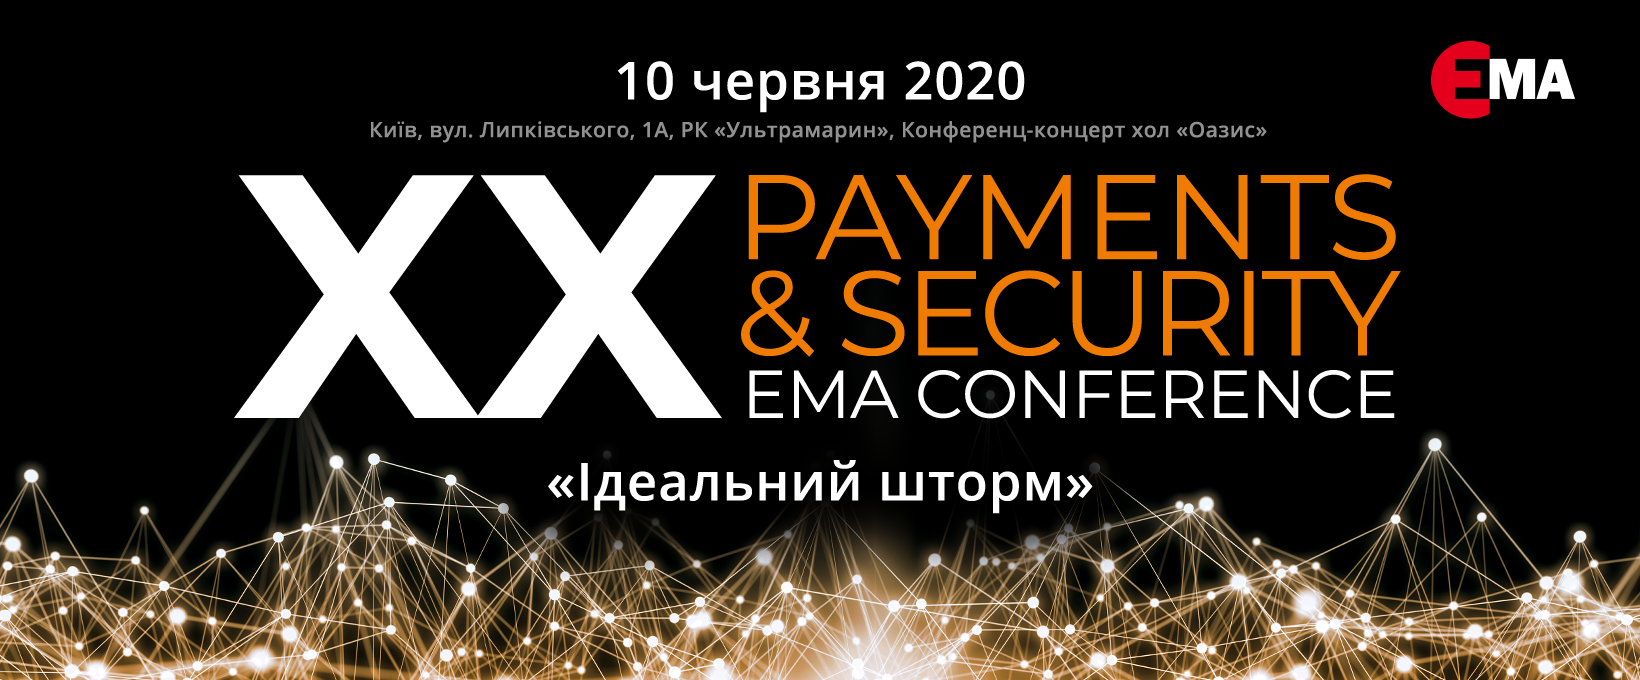 XX Payments & XIII Security EMA Conference